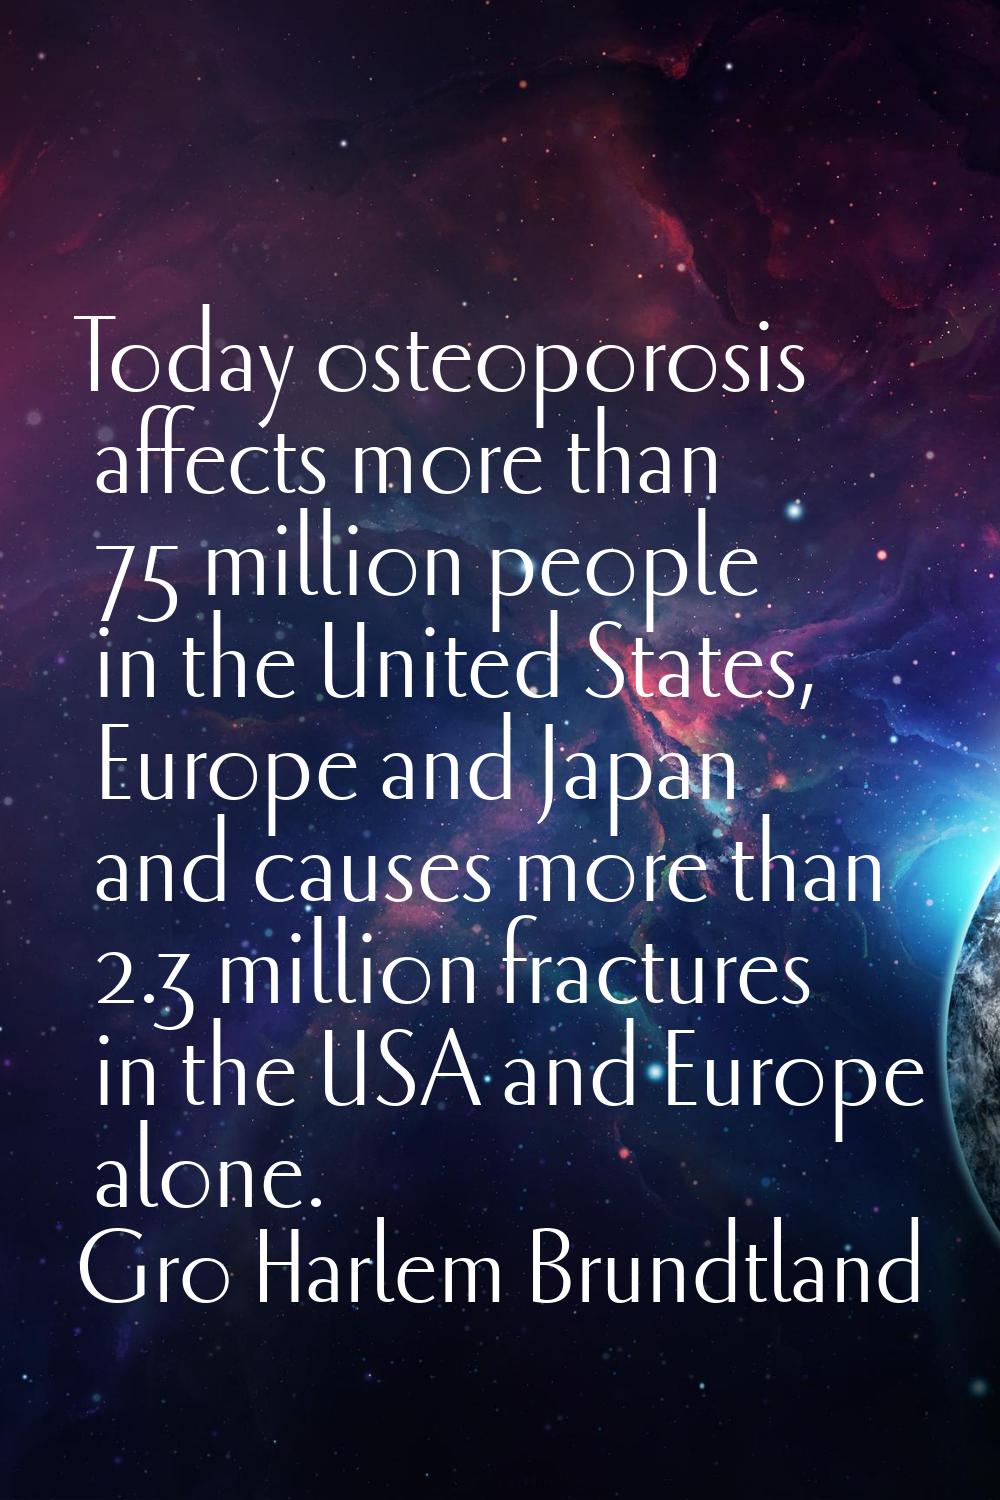 Today osteoporosis affects more than 75 million people in the United States, Europe and Japan and c